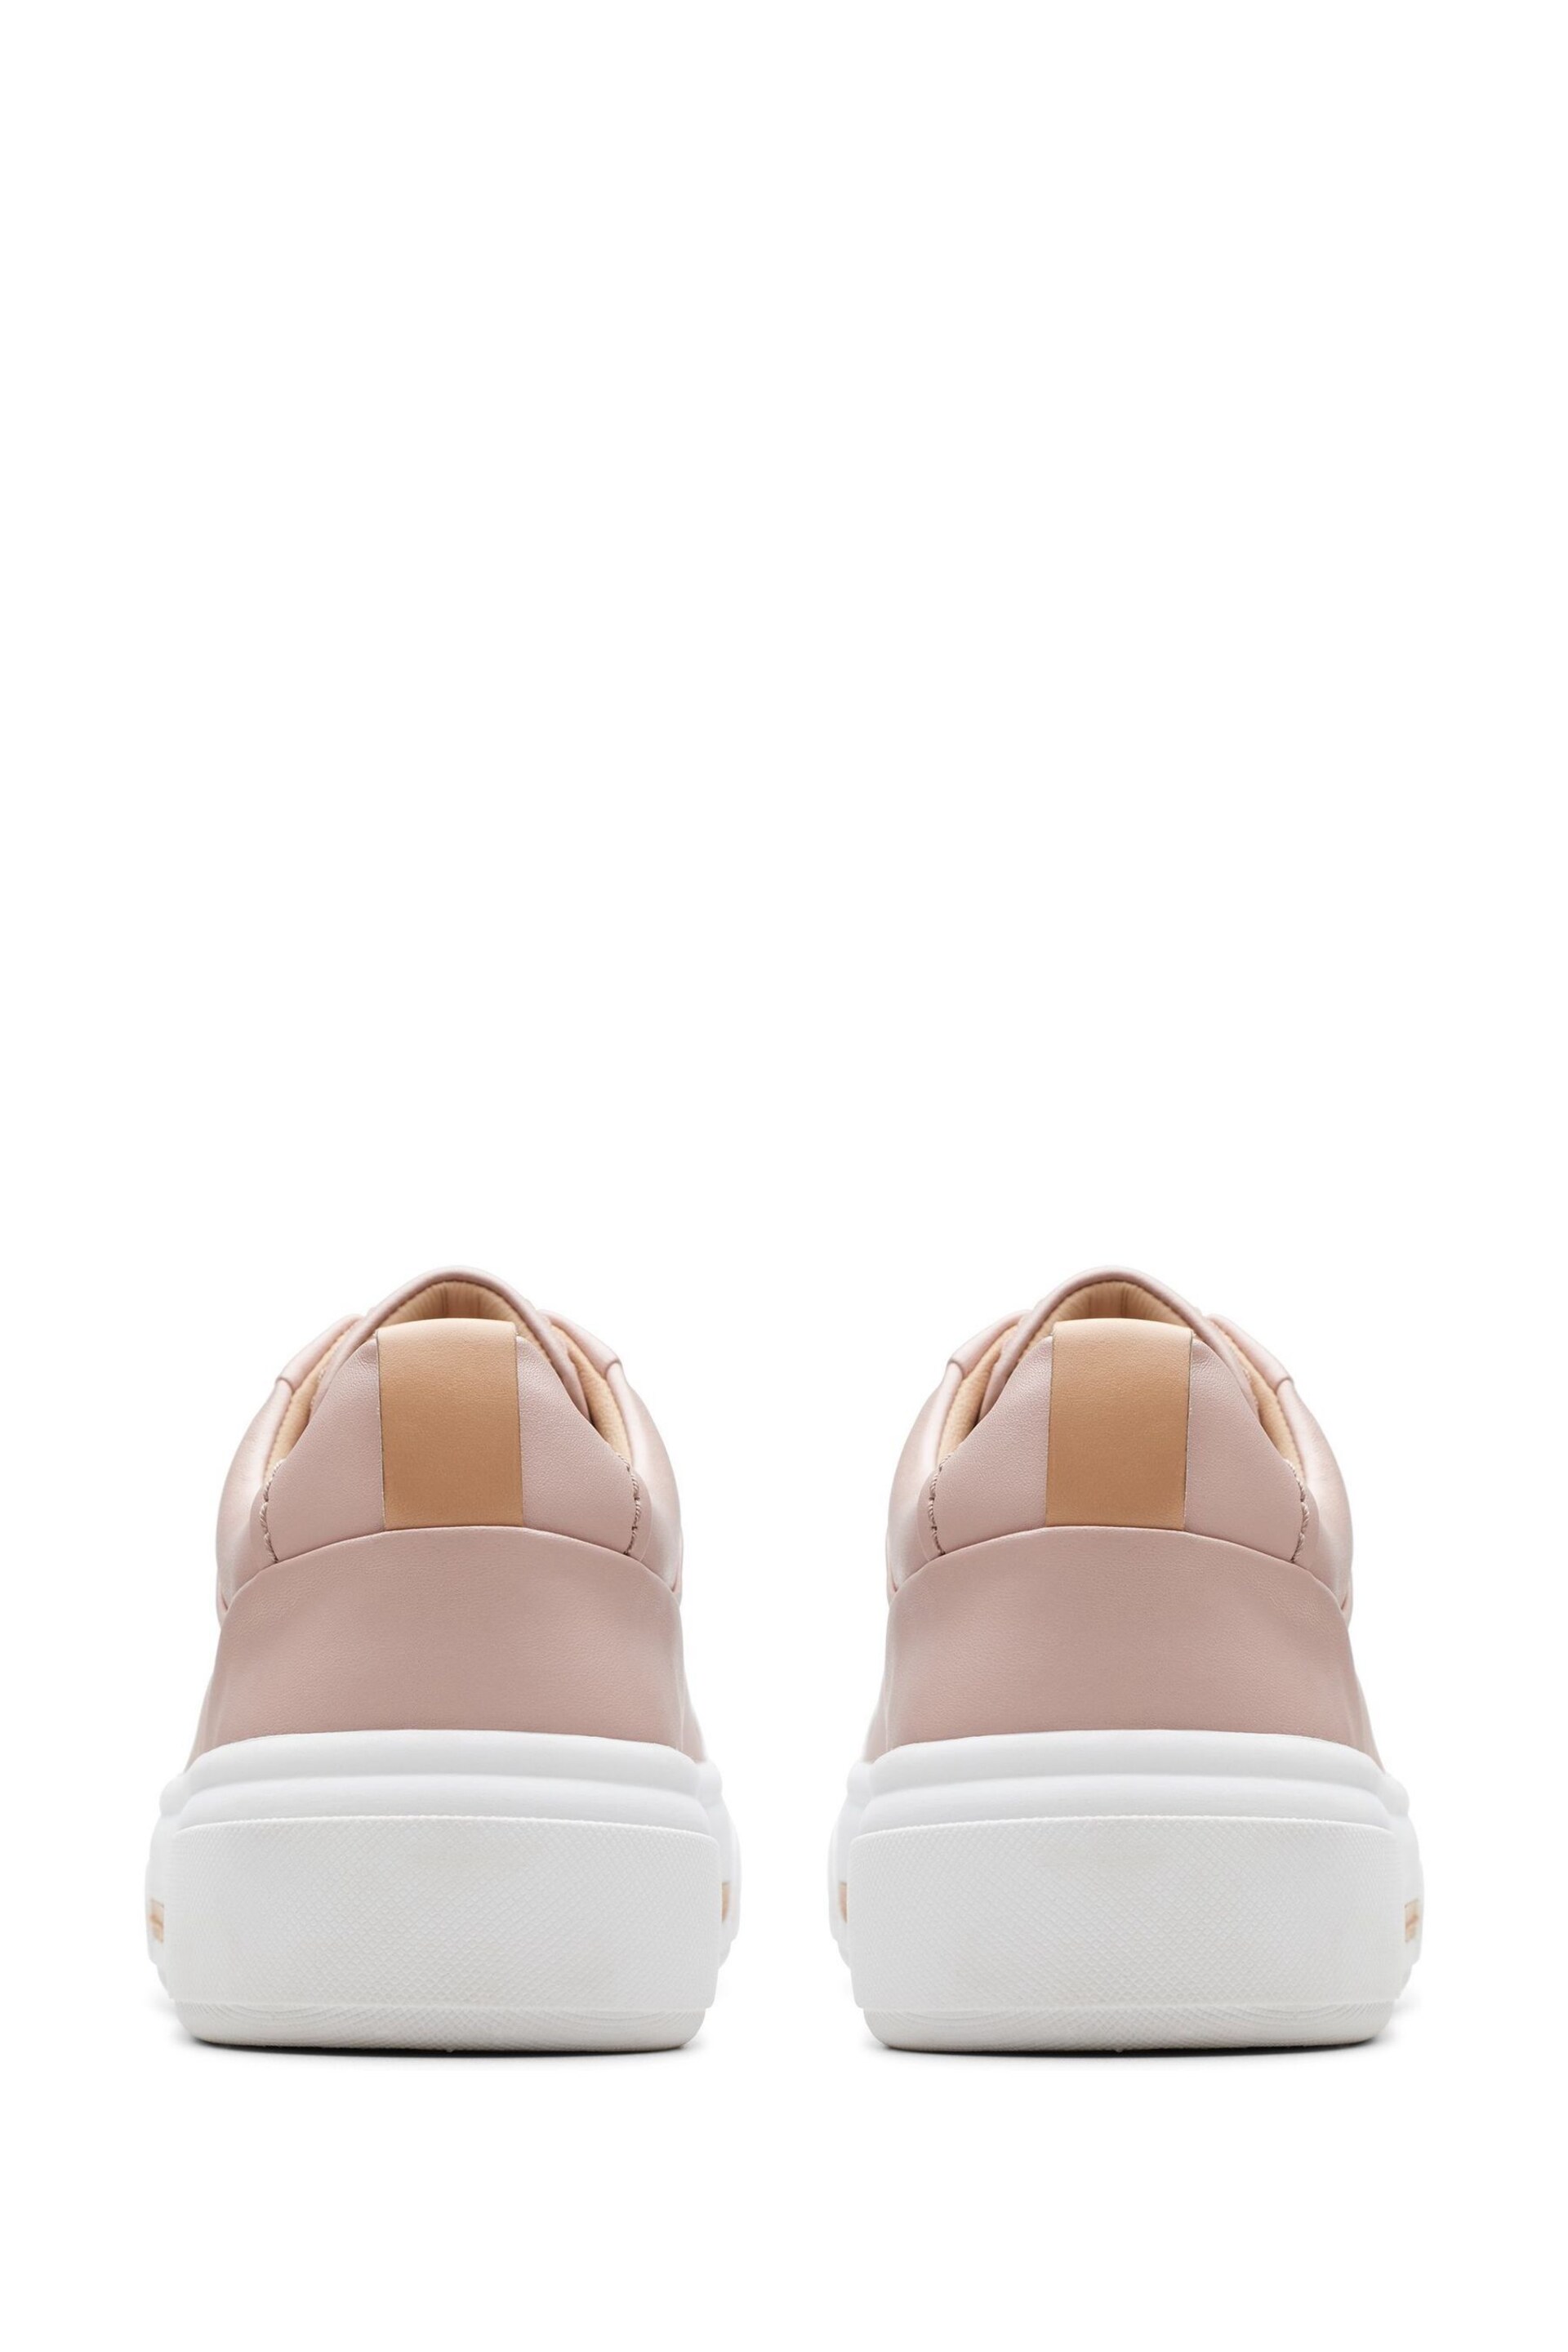 Clarks Pink Leather Hollyhock Walk Shoes - Image 6 of 10